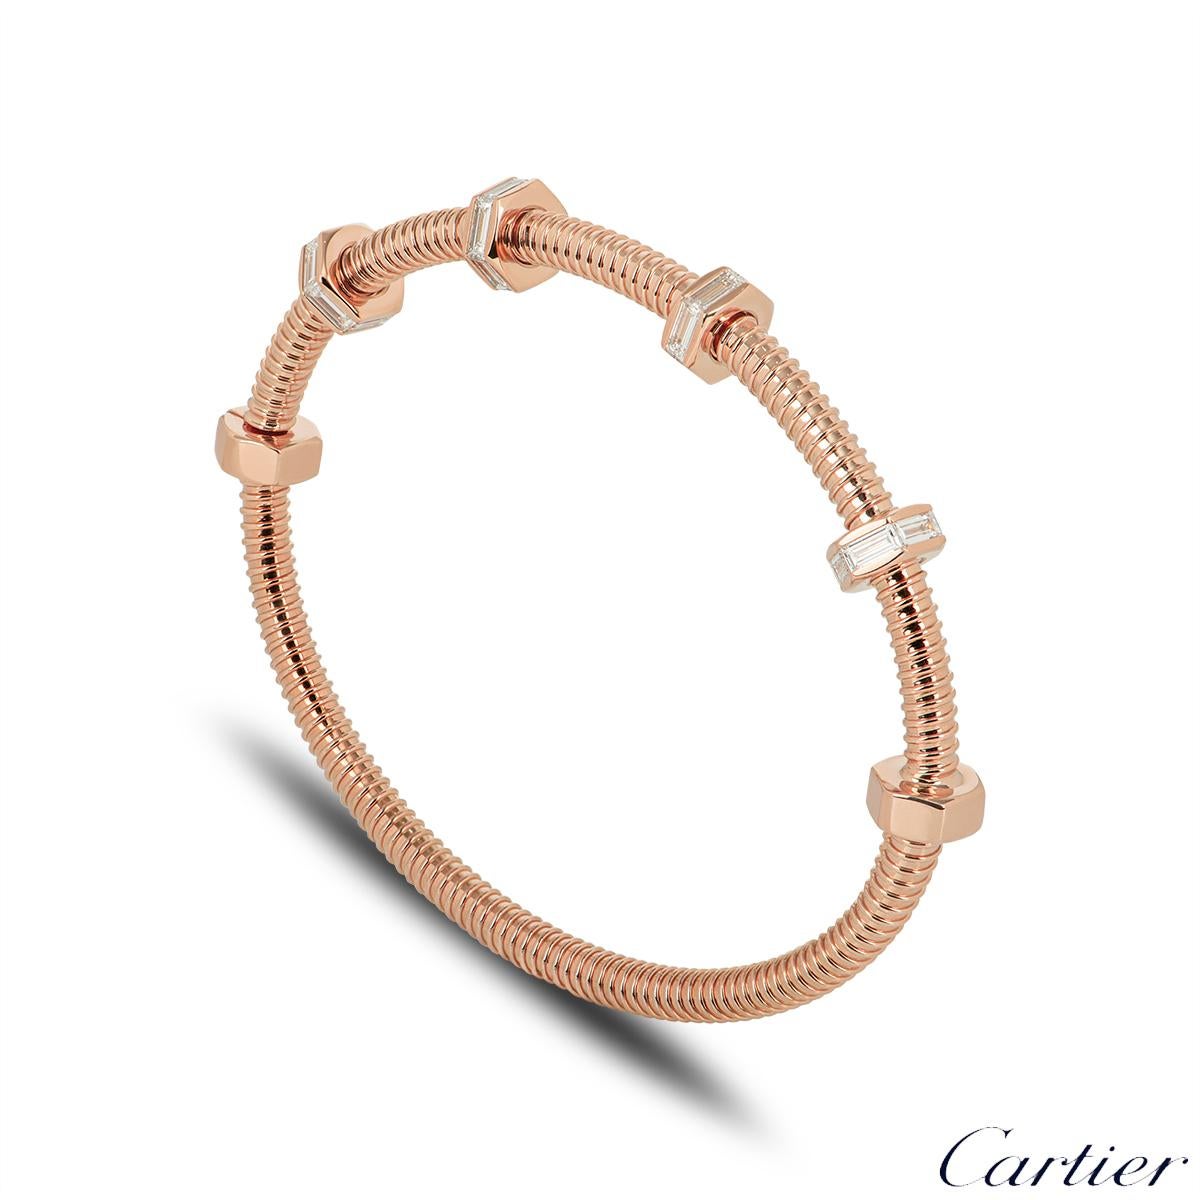 A stunning size 16, 18k Rose gold bracelet by Cartier from the Ecrou De Cartier collection. The bracelet has a threaded design which features 6 bolts with 4 swivelling freely along one side of the bracelet, each set with 6 baguette-cut diamonds